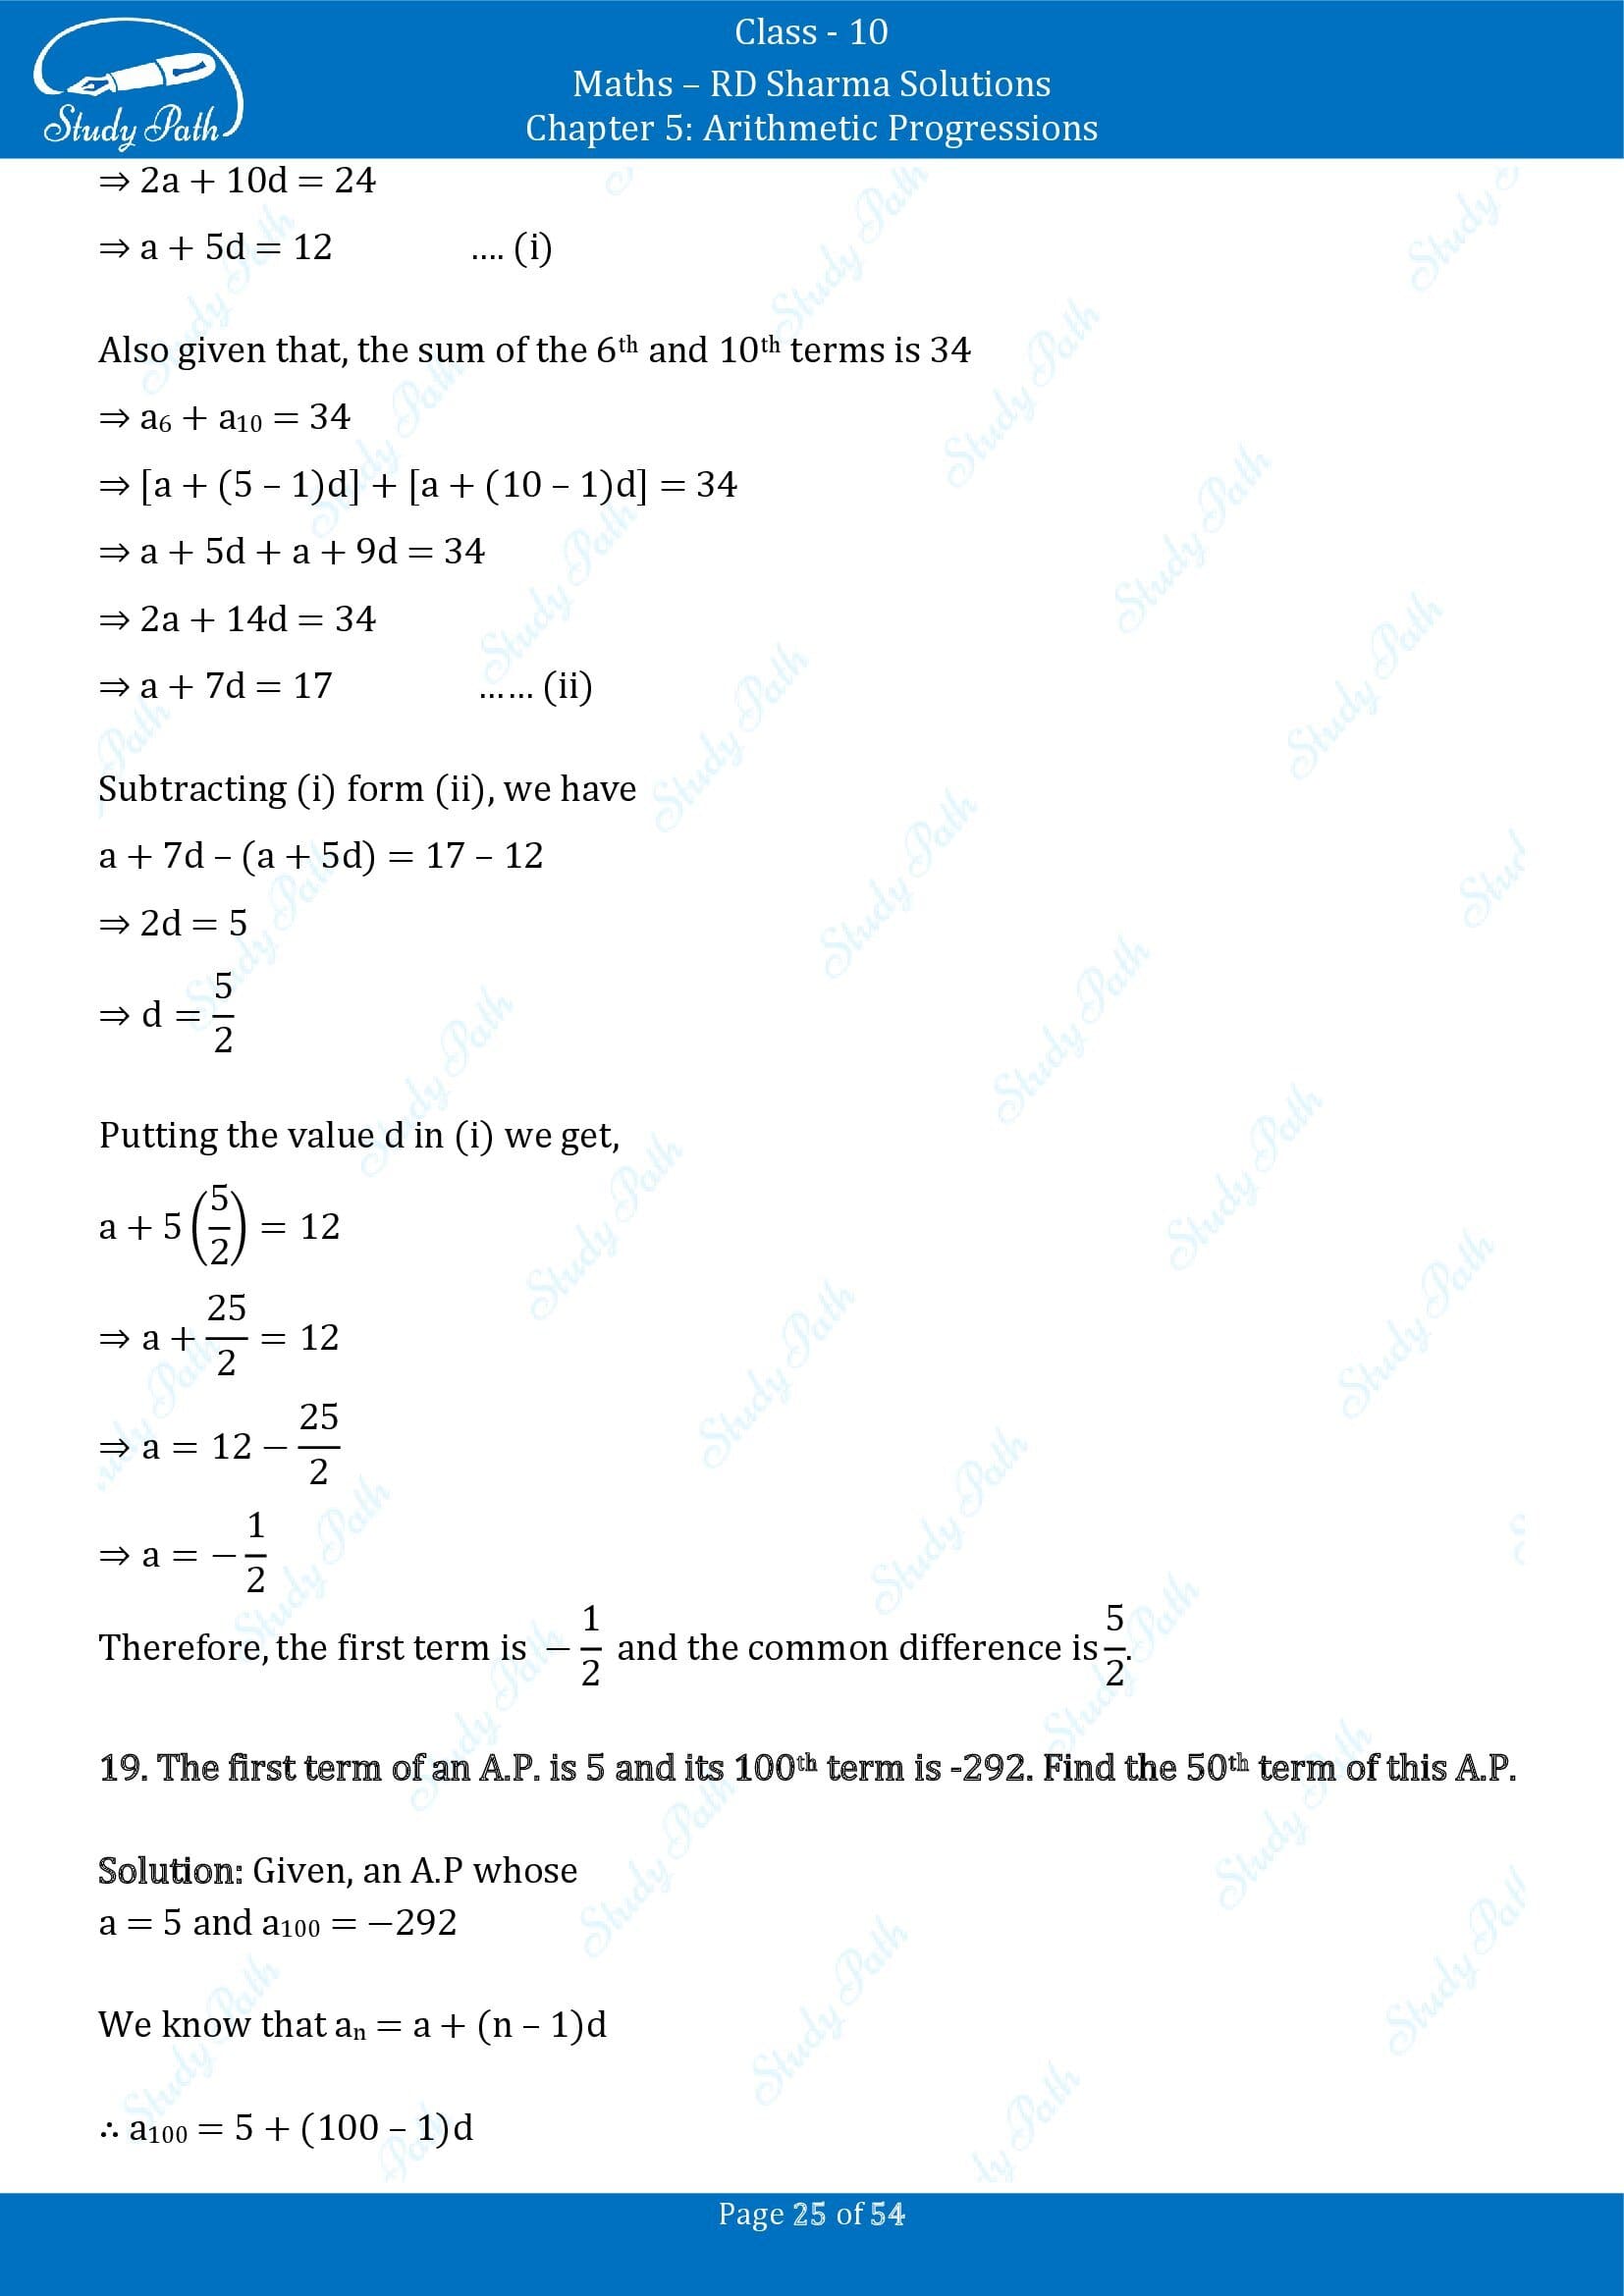 RD Sharma Solutions Class 10 Chapter 5 Arithmetic Progressions Exercise 5.4 00025